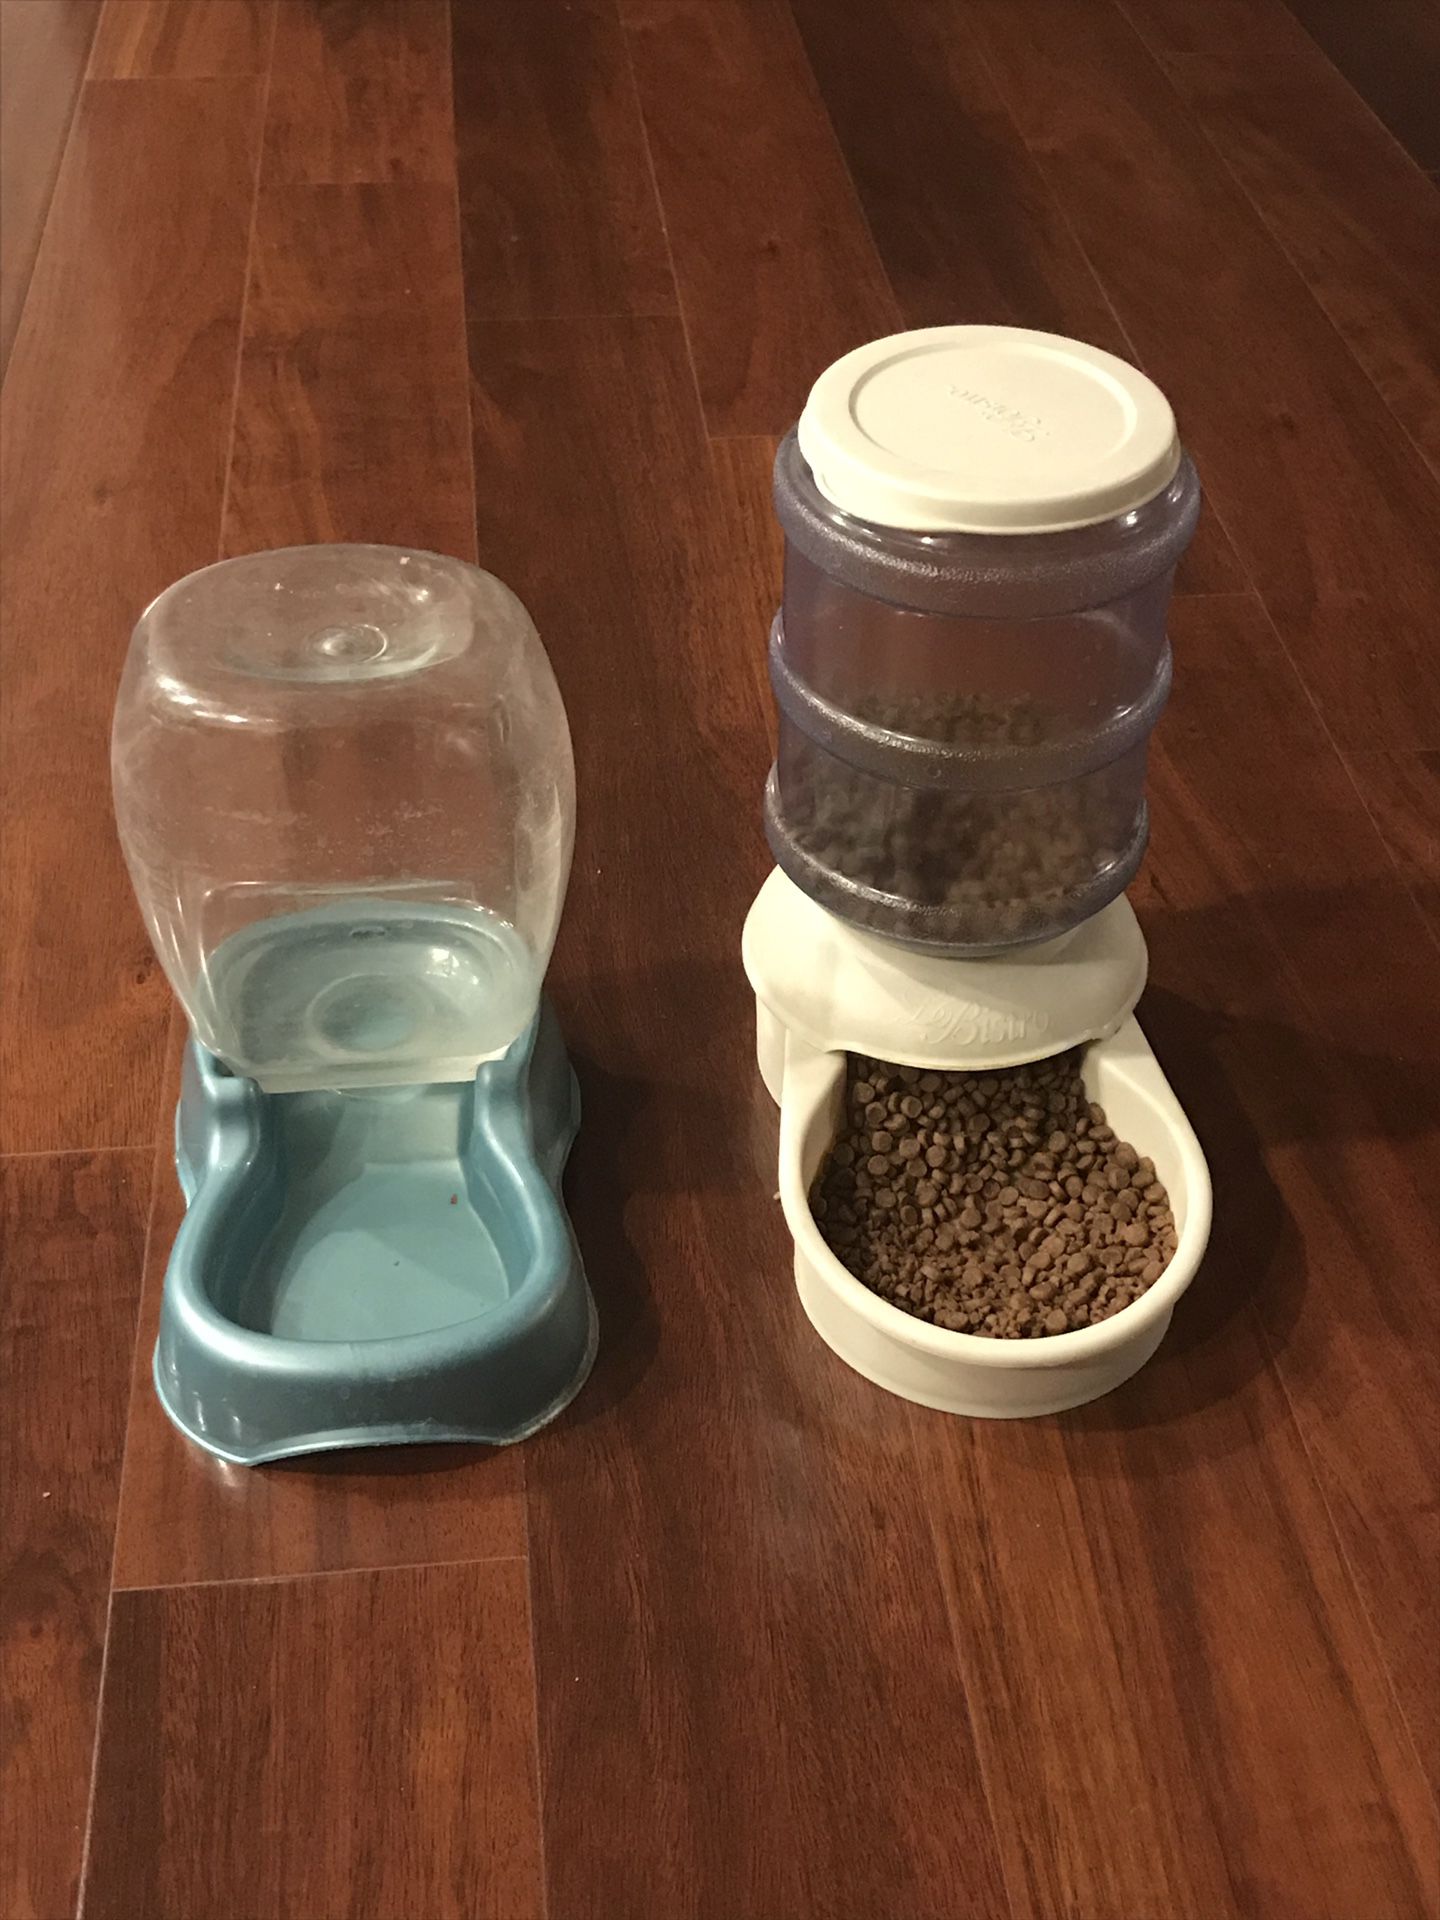 Pet cat food and after dispensers